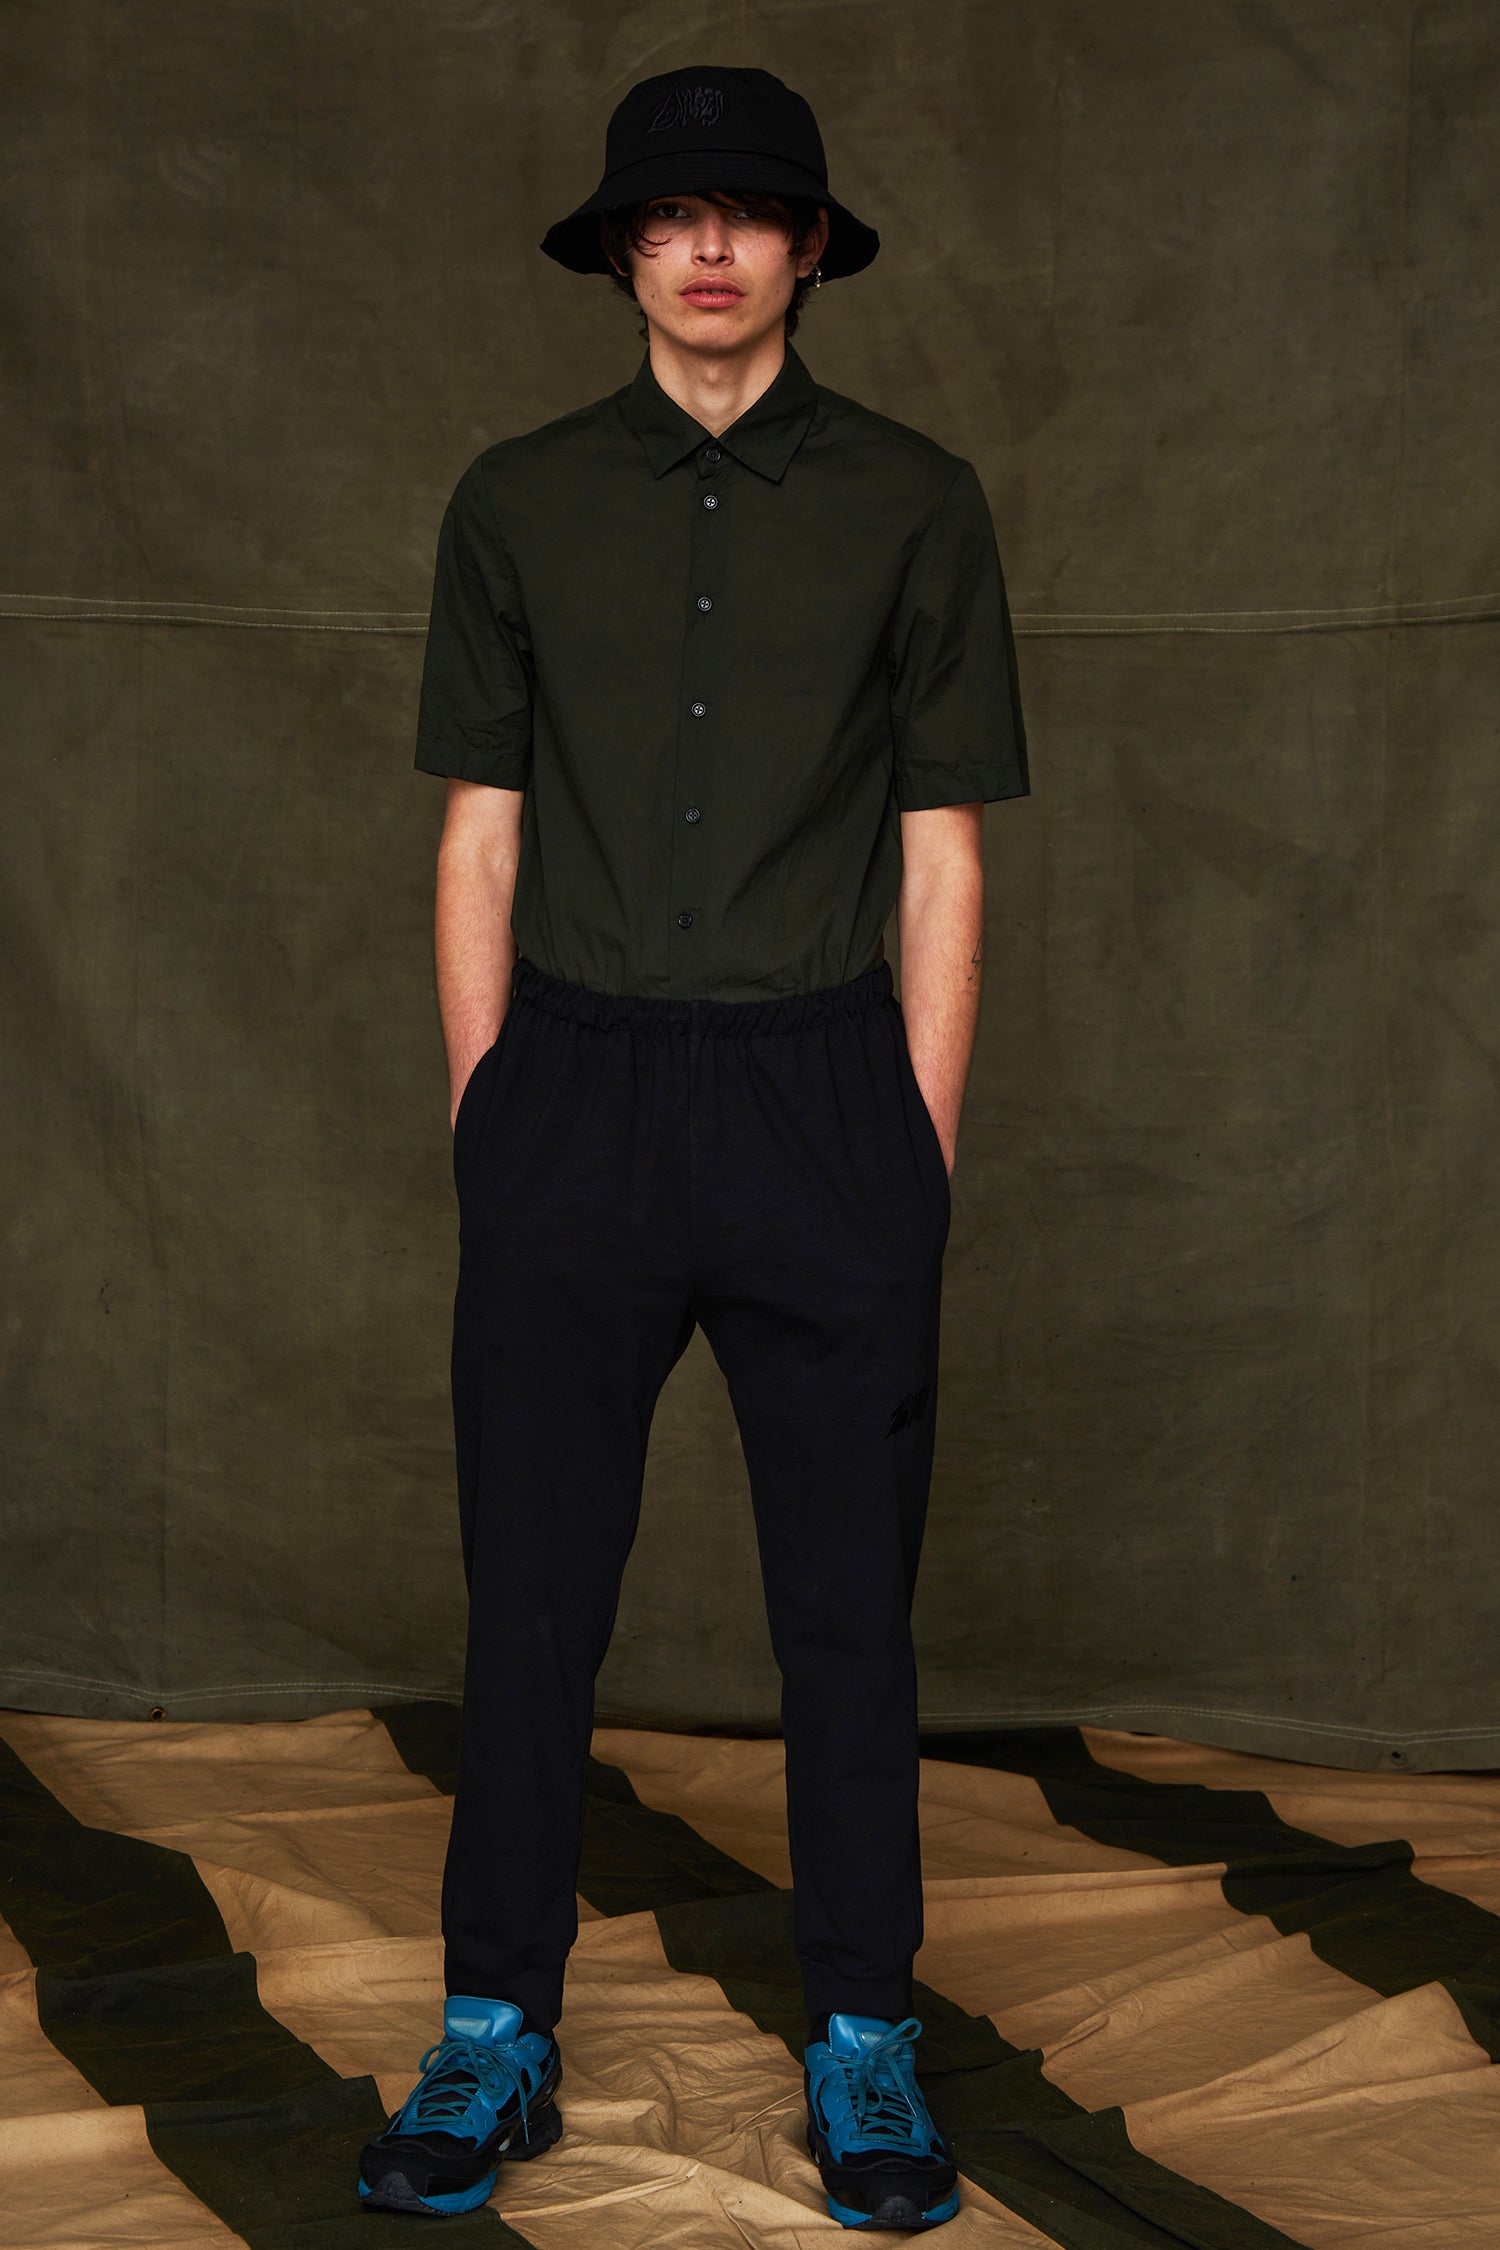 S/S CLASSIC SHIRT IN FOREST, S22